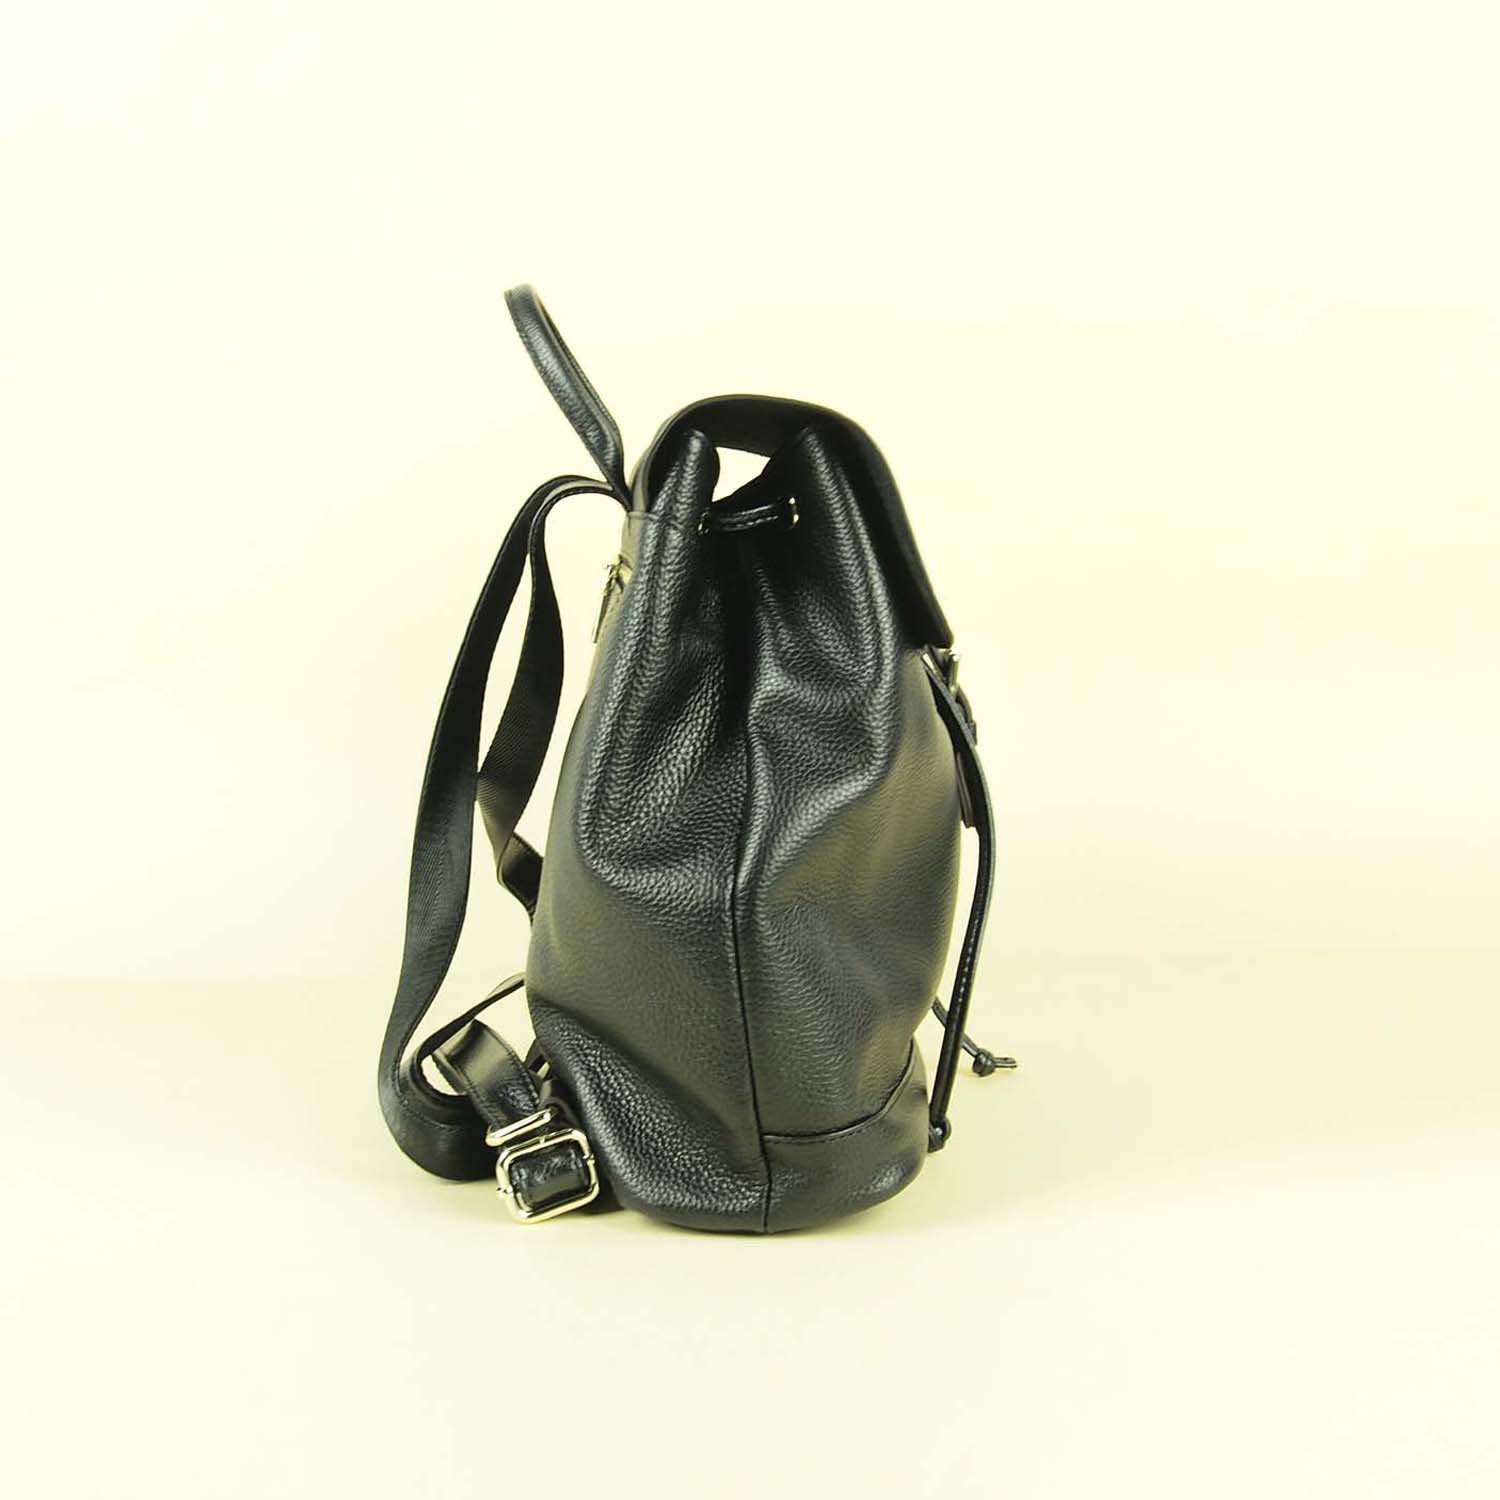 Super Urban Forest Morgan Backpack Side View